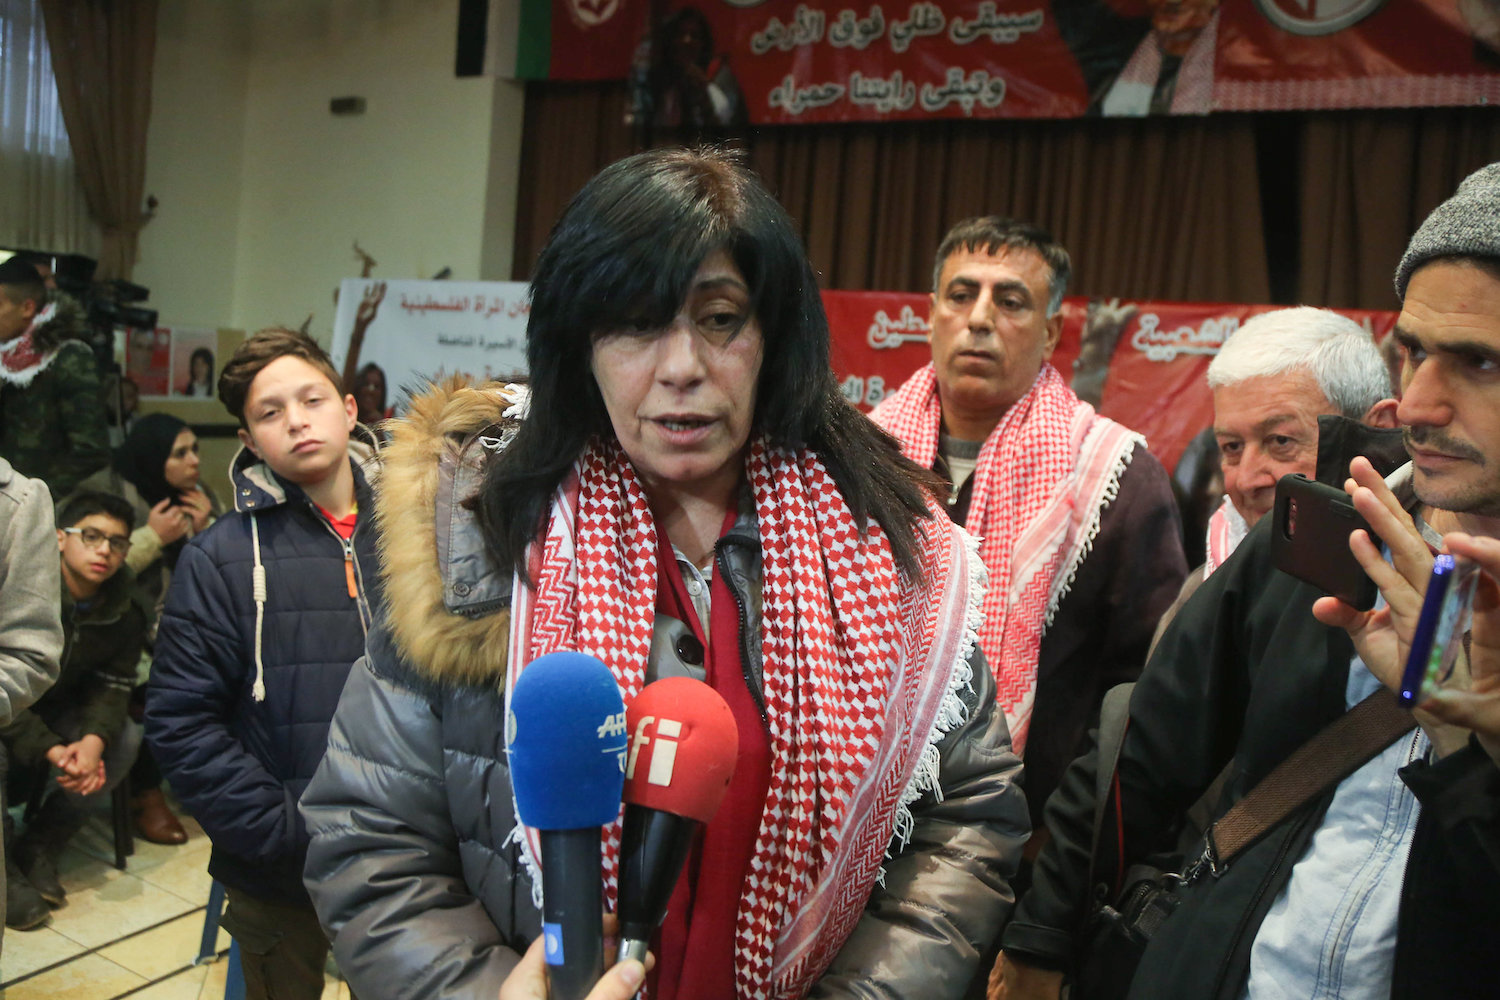 Palestinian parliament member Khalida Jarrar seen being welcomed by her supporters after being released from prison, Ramallah, February 28, 2019. (STR/Flash90)